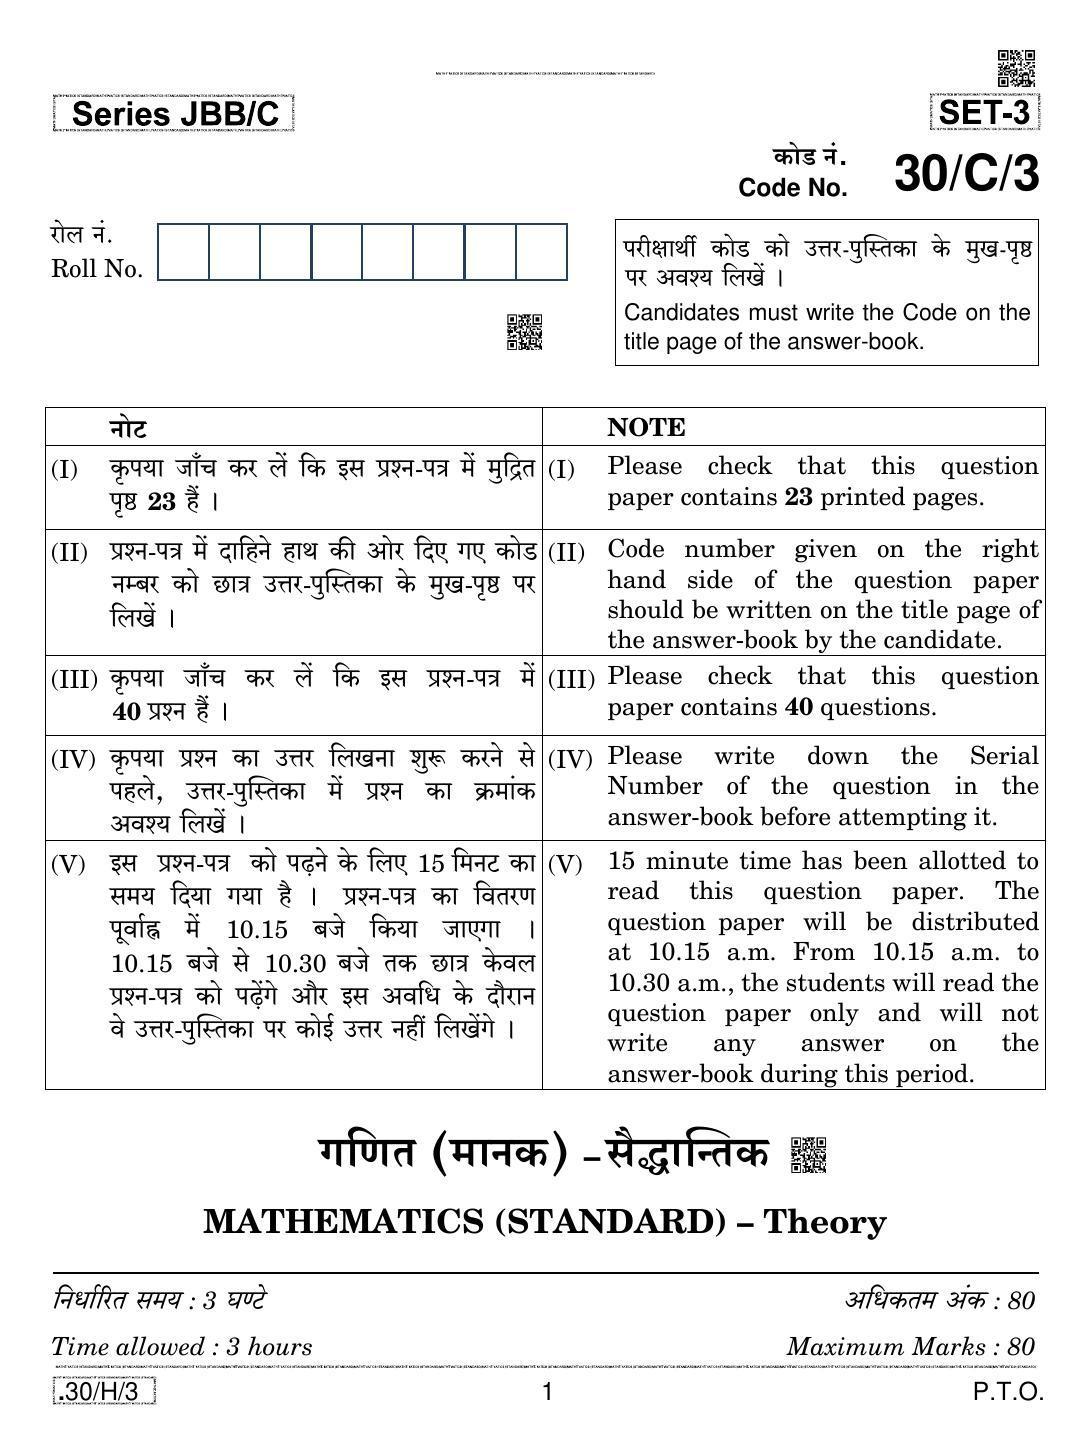 CBSE Class 10 30-C-3 - Maths (Standard) 2020 Compartment Question Paper - Page 1